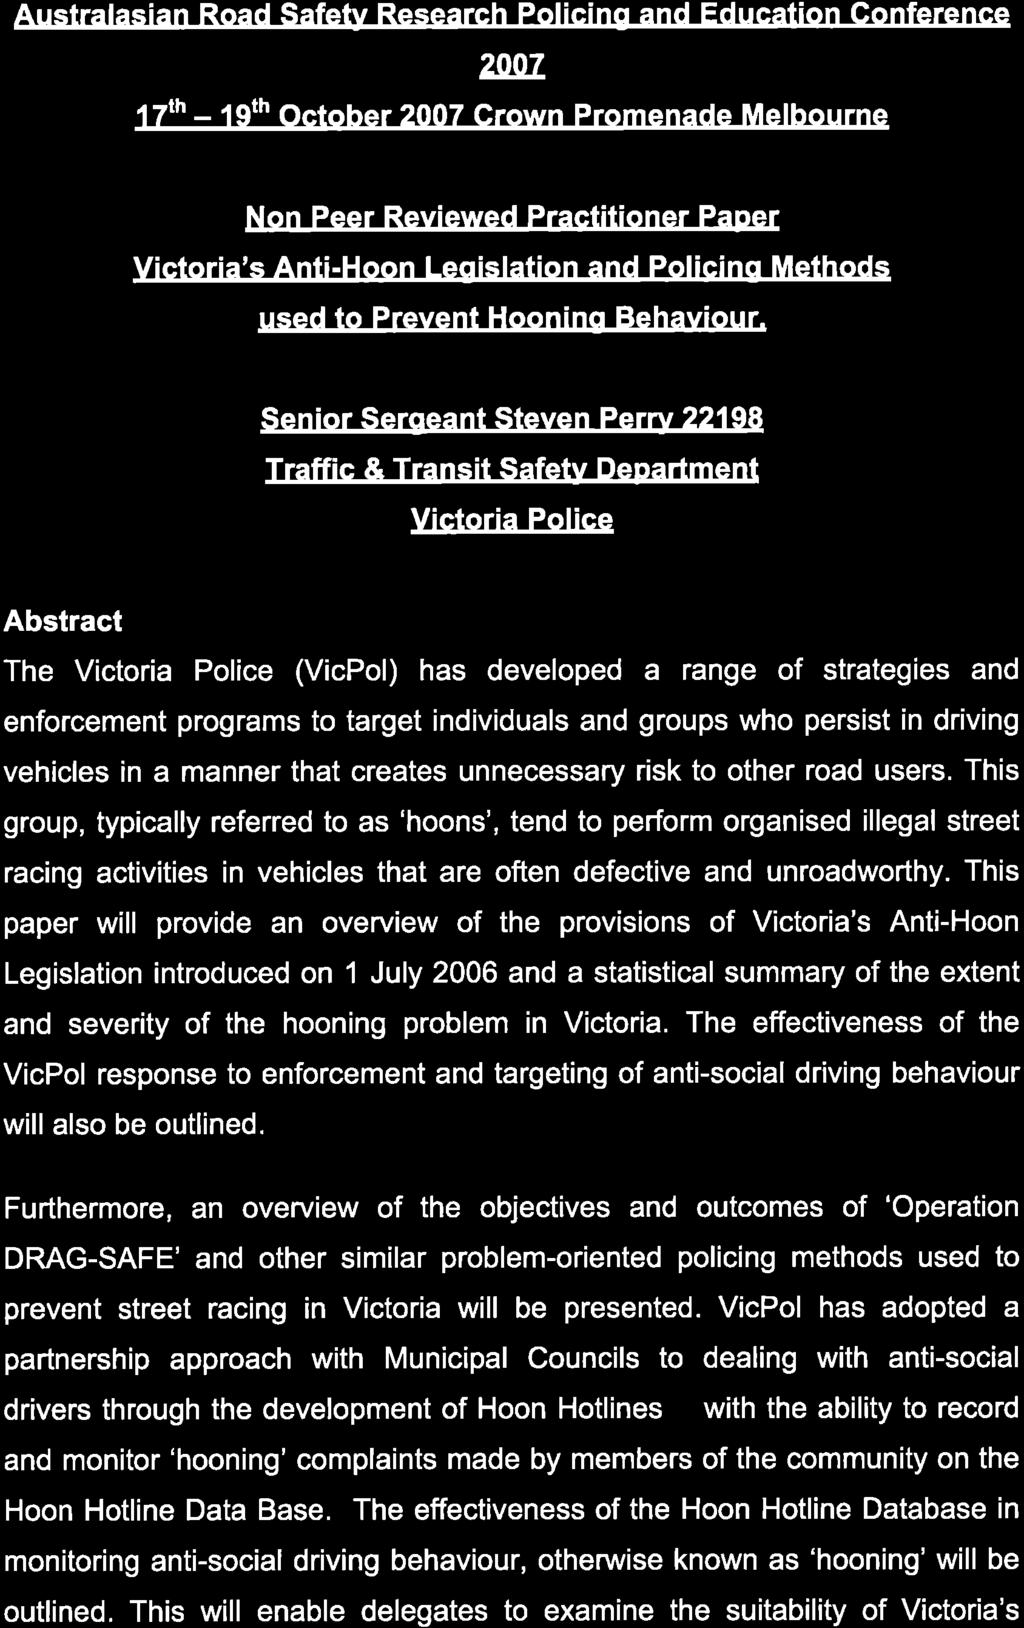 Australasian Road Safety Research Policing and Education Conference ltth - 2007 19th October 2007 Grown Promenade Melbourne Non Peer Reviewed Practitioner Paper Victoria's Anti-Hoon Legislation and